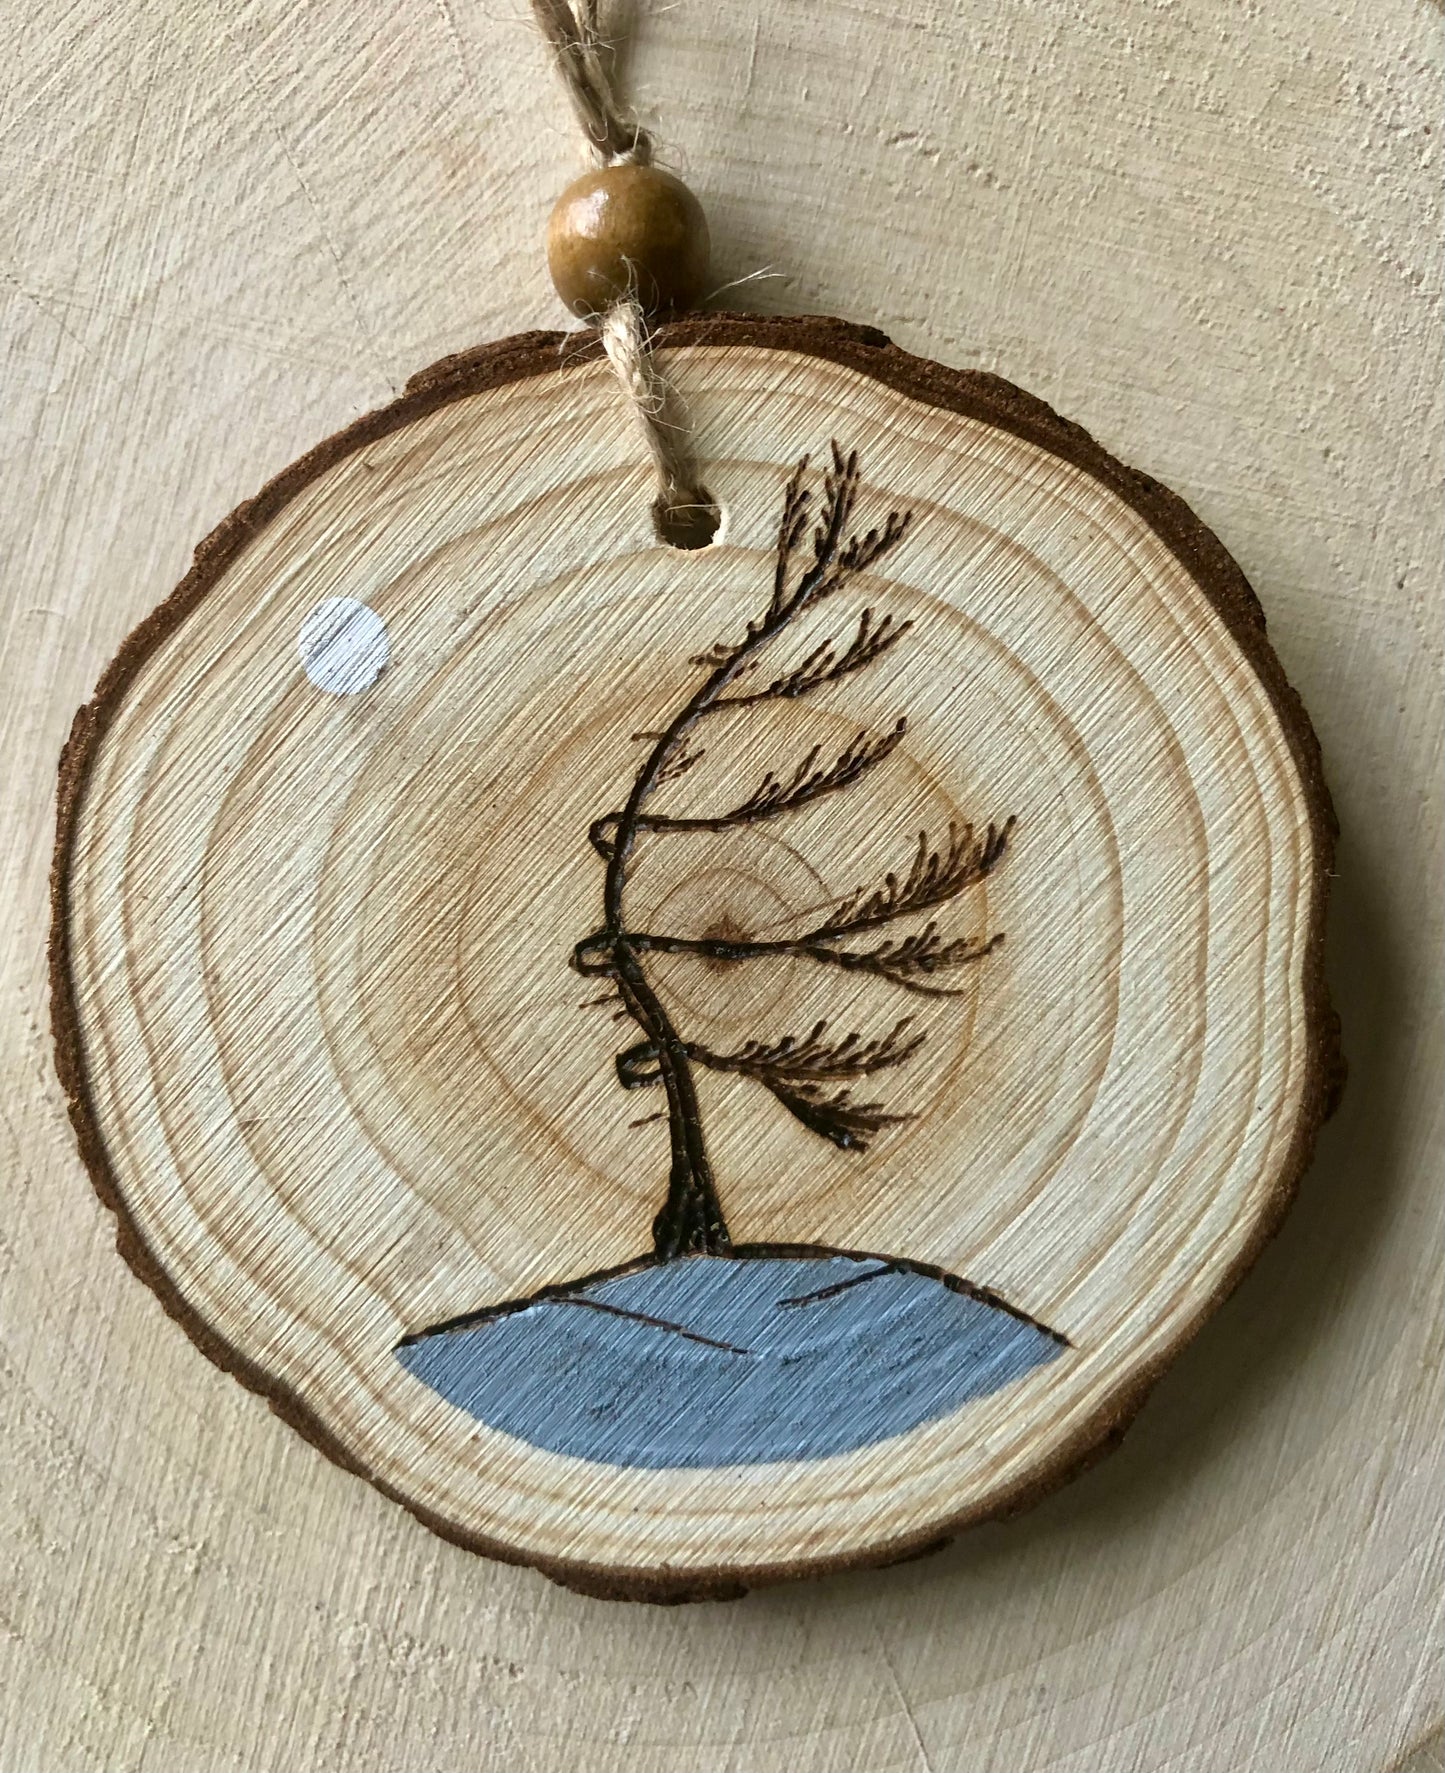 Wood burned and hand painted gift tags / tree ornaments